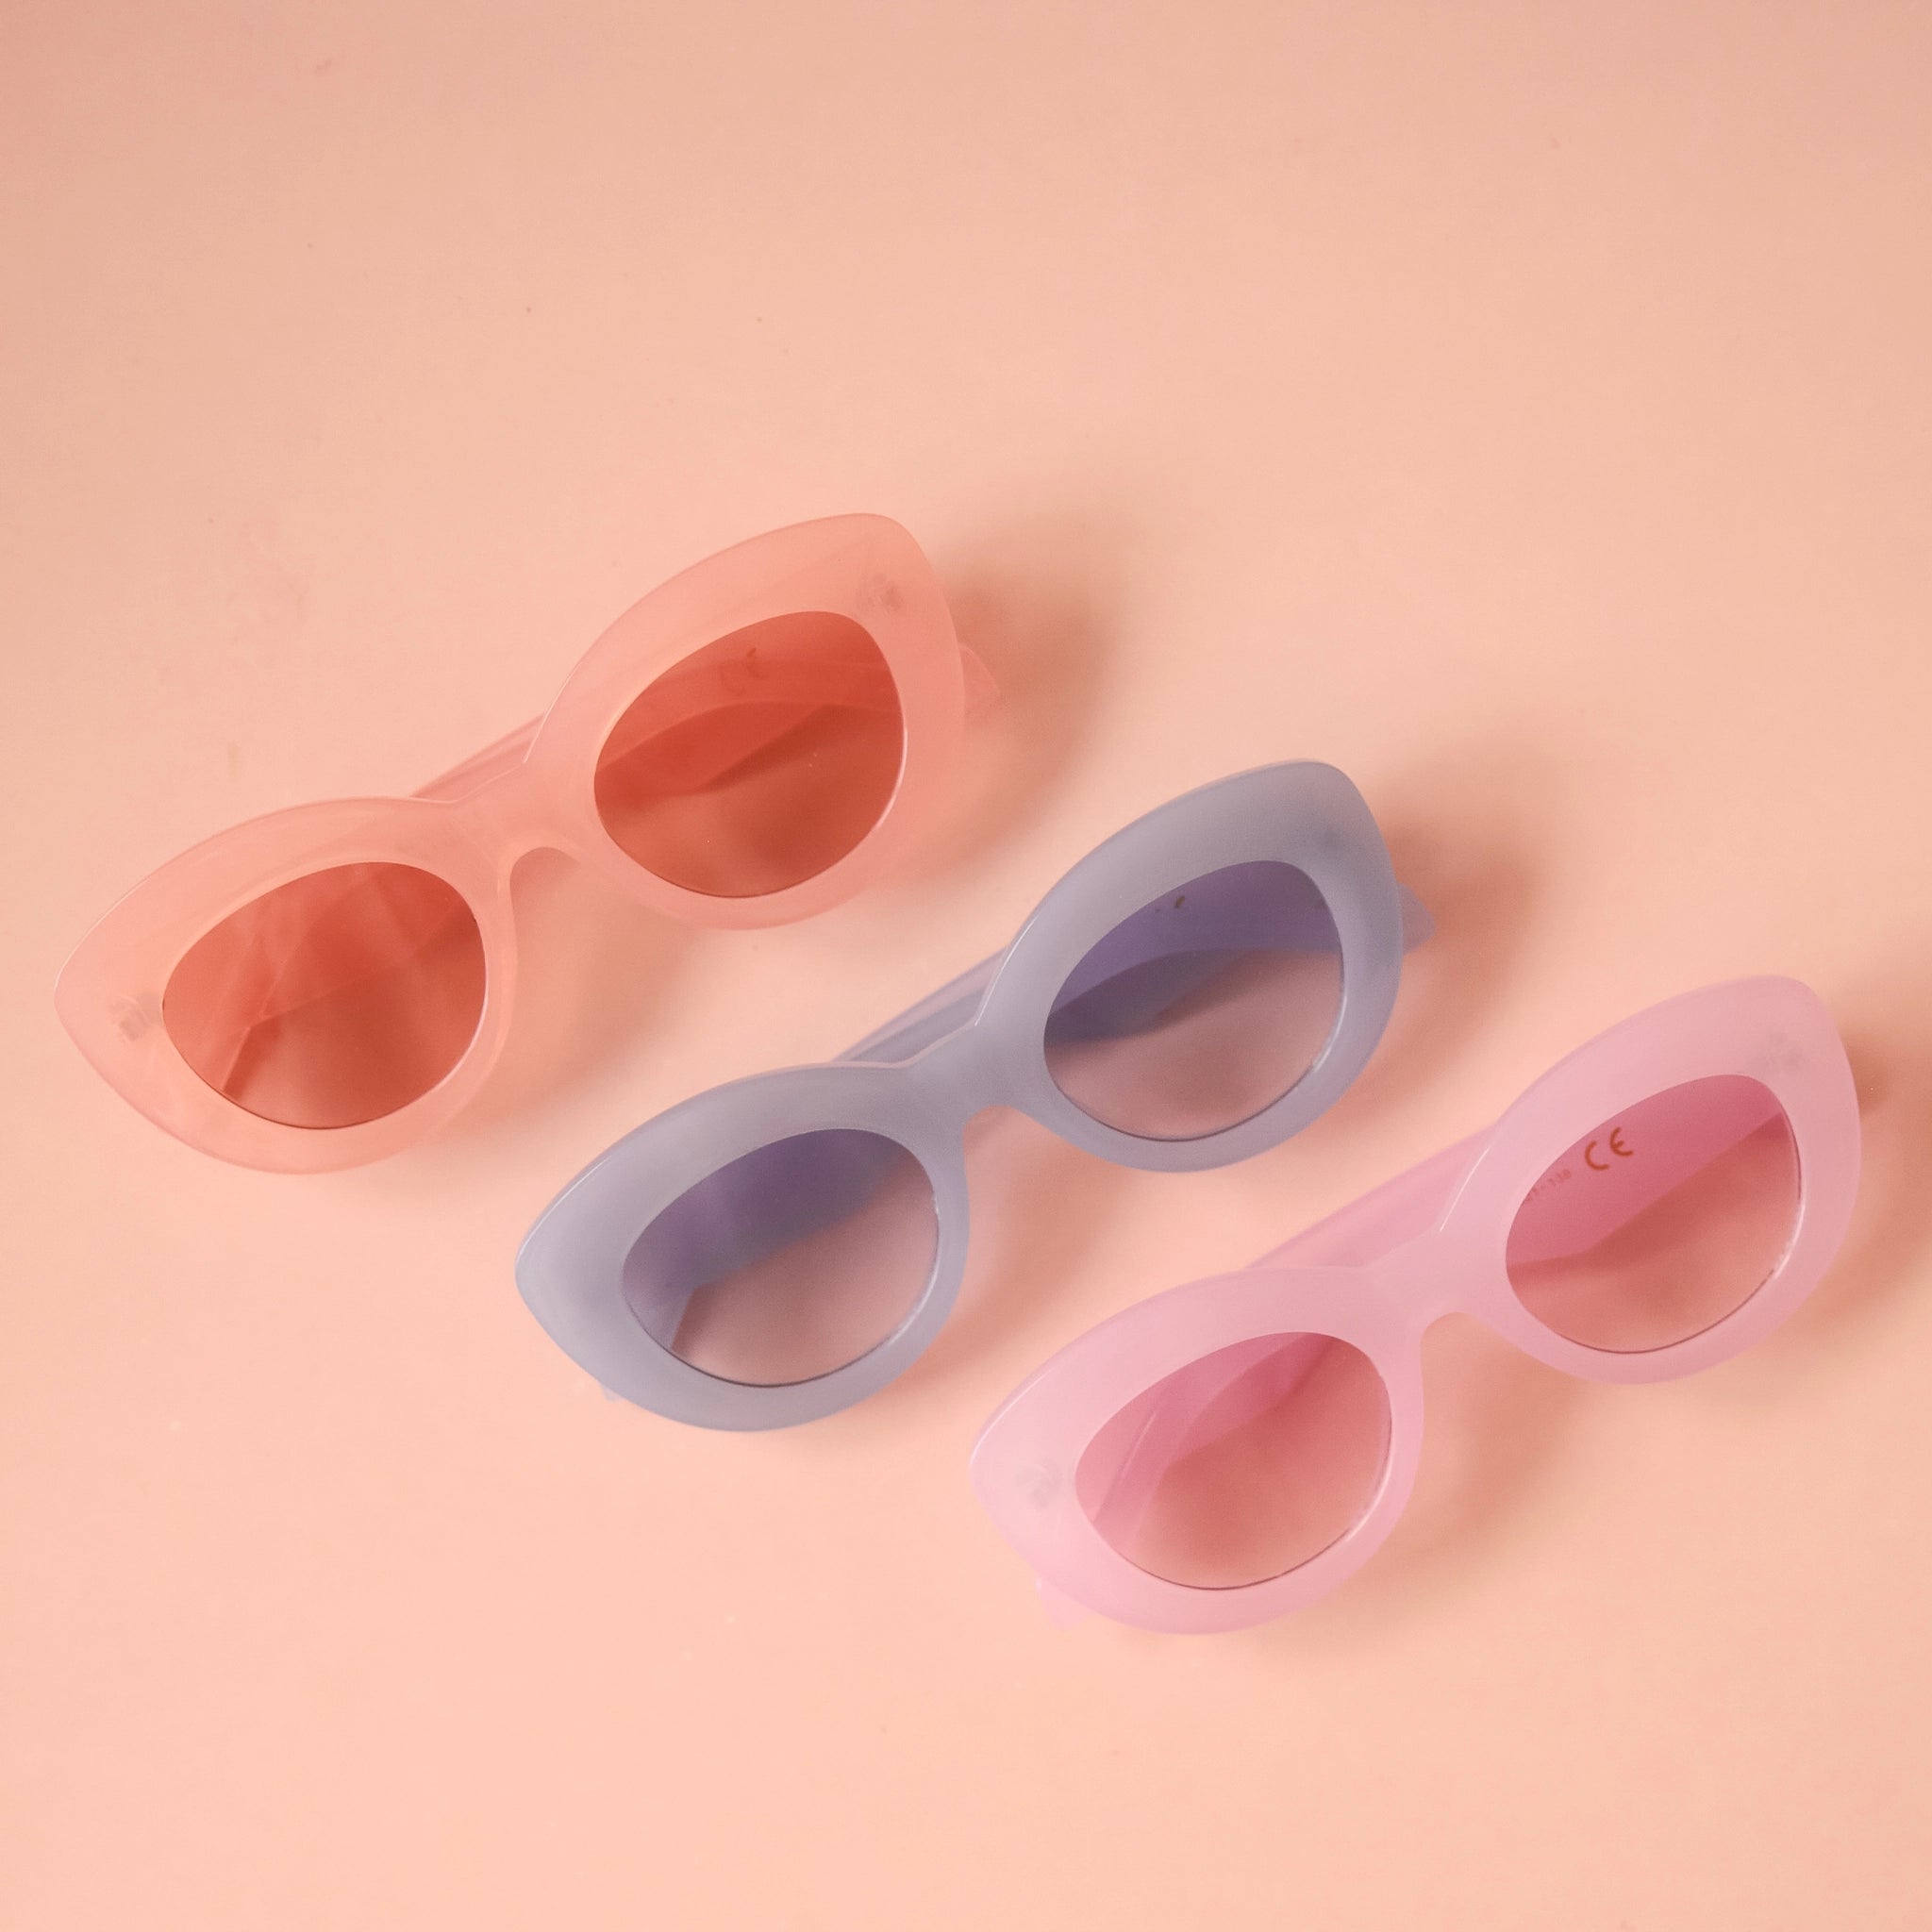 On a peachy background is a group photo of three of the different color options for the Gemma Sunglass frame shape. 